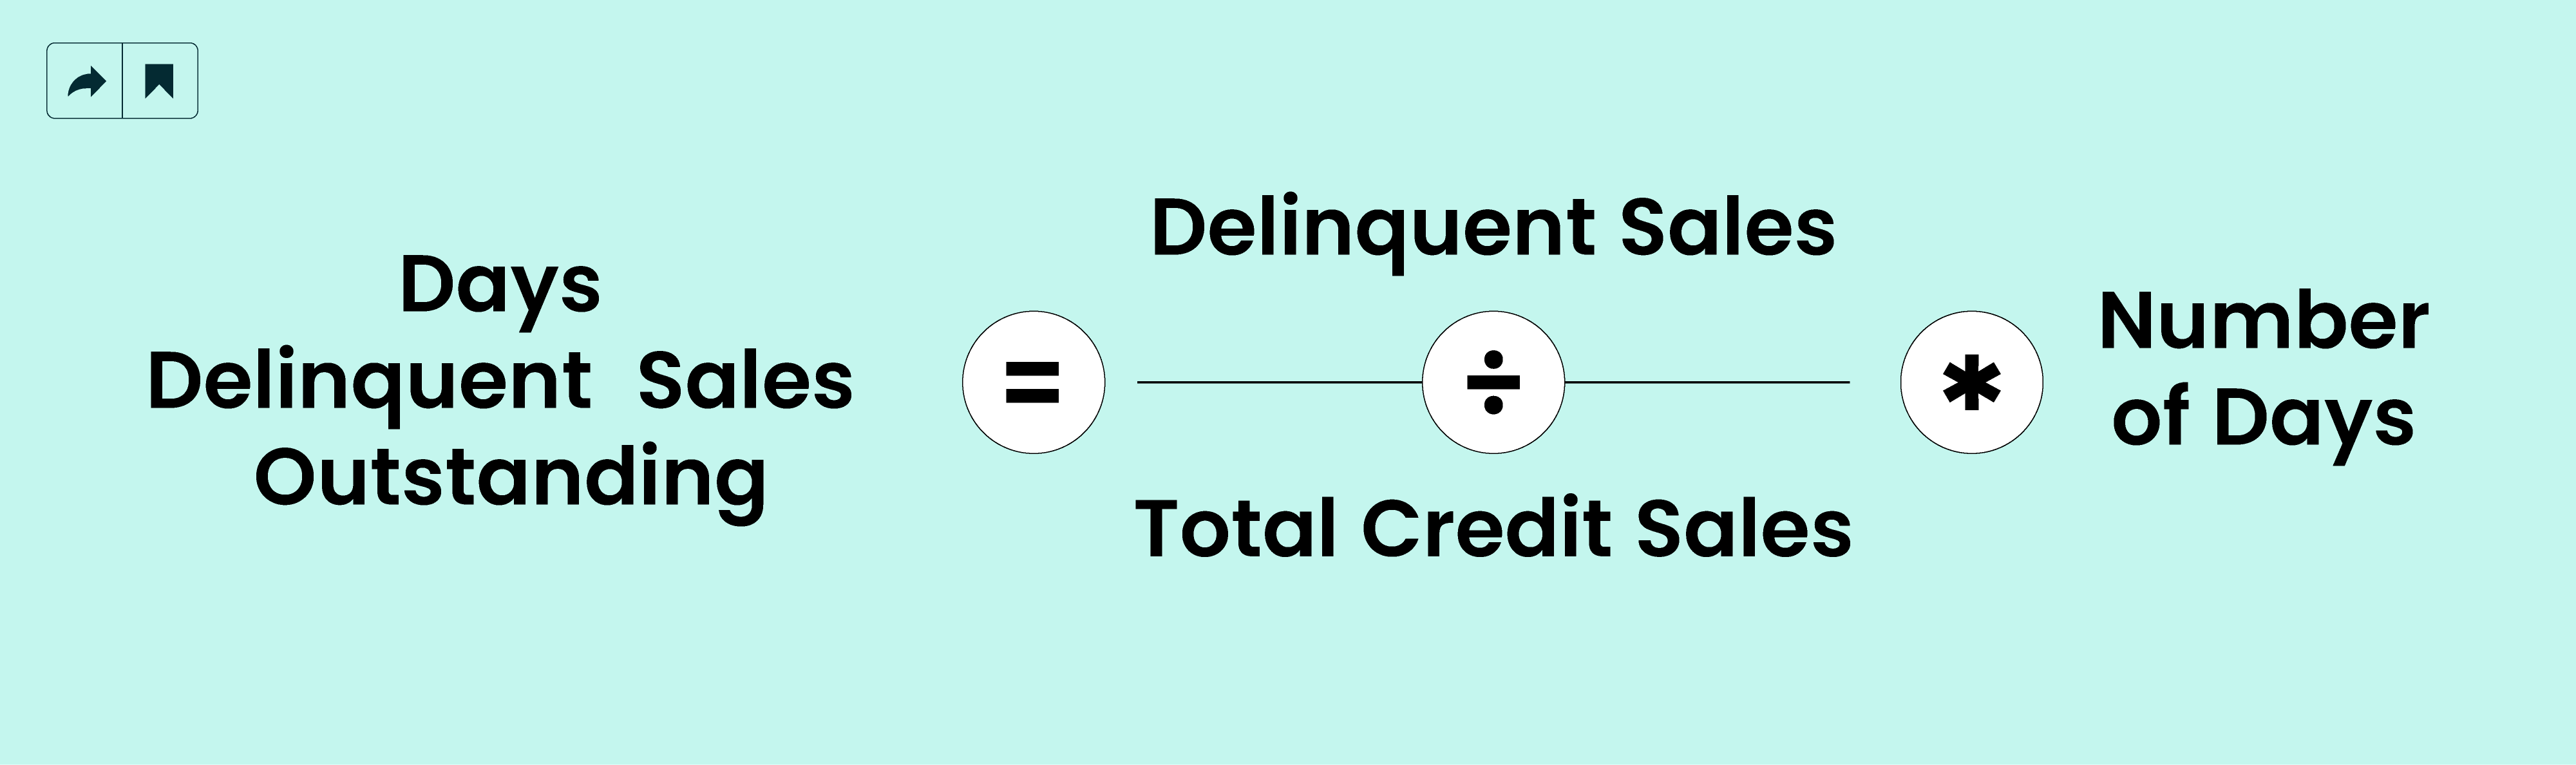 Days Delinquent Sales Outstanding: Account receivable formula